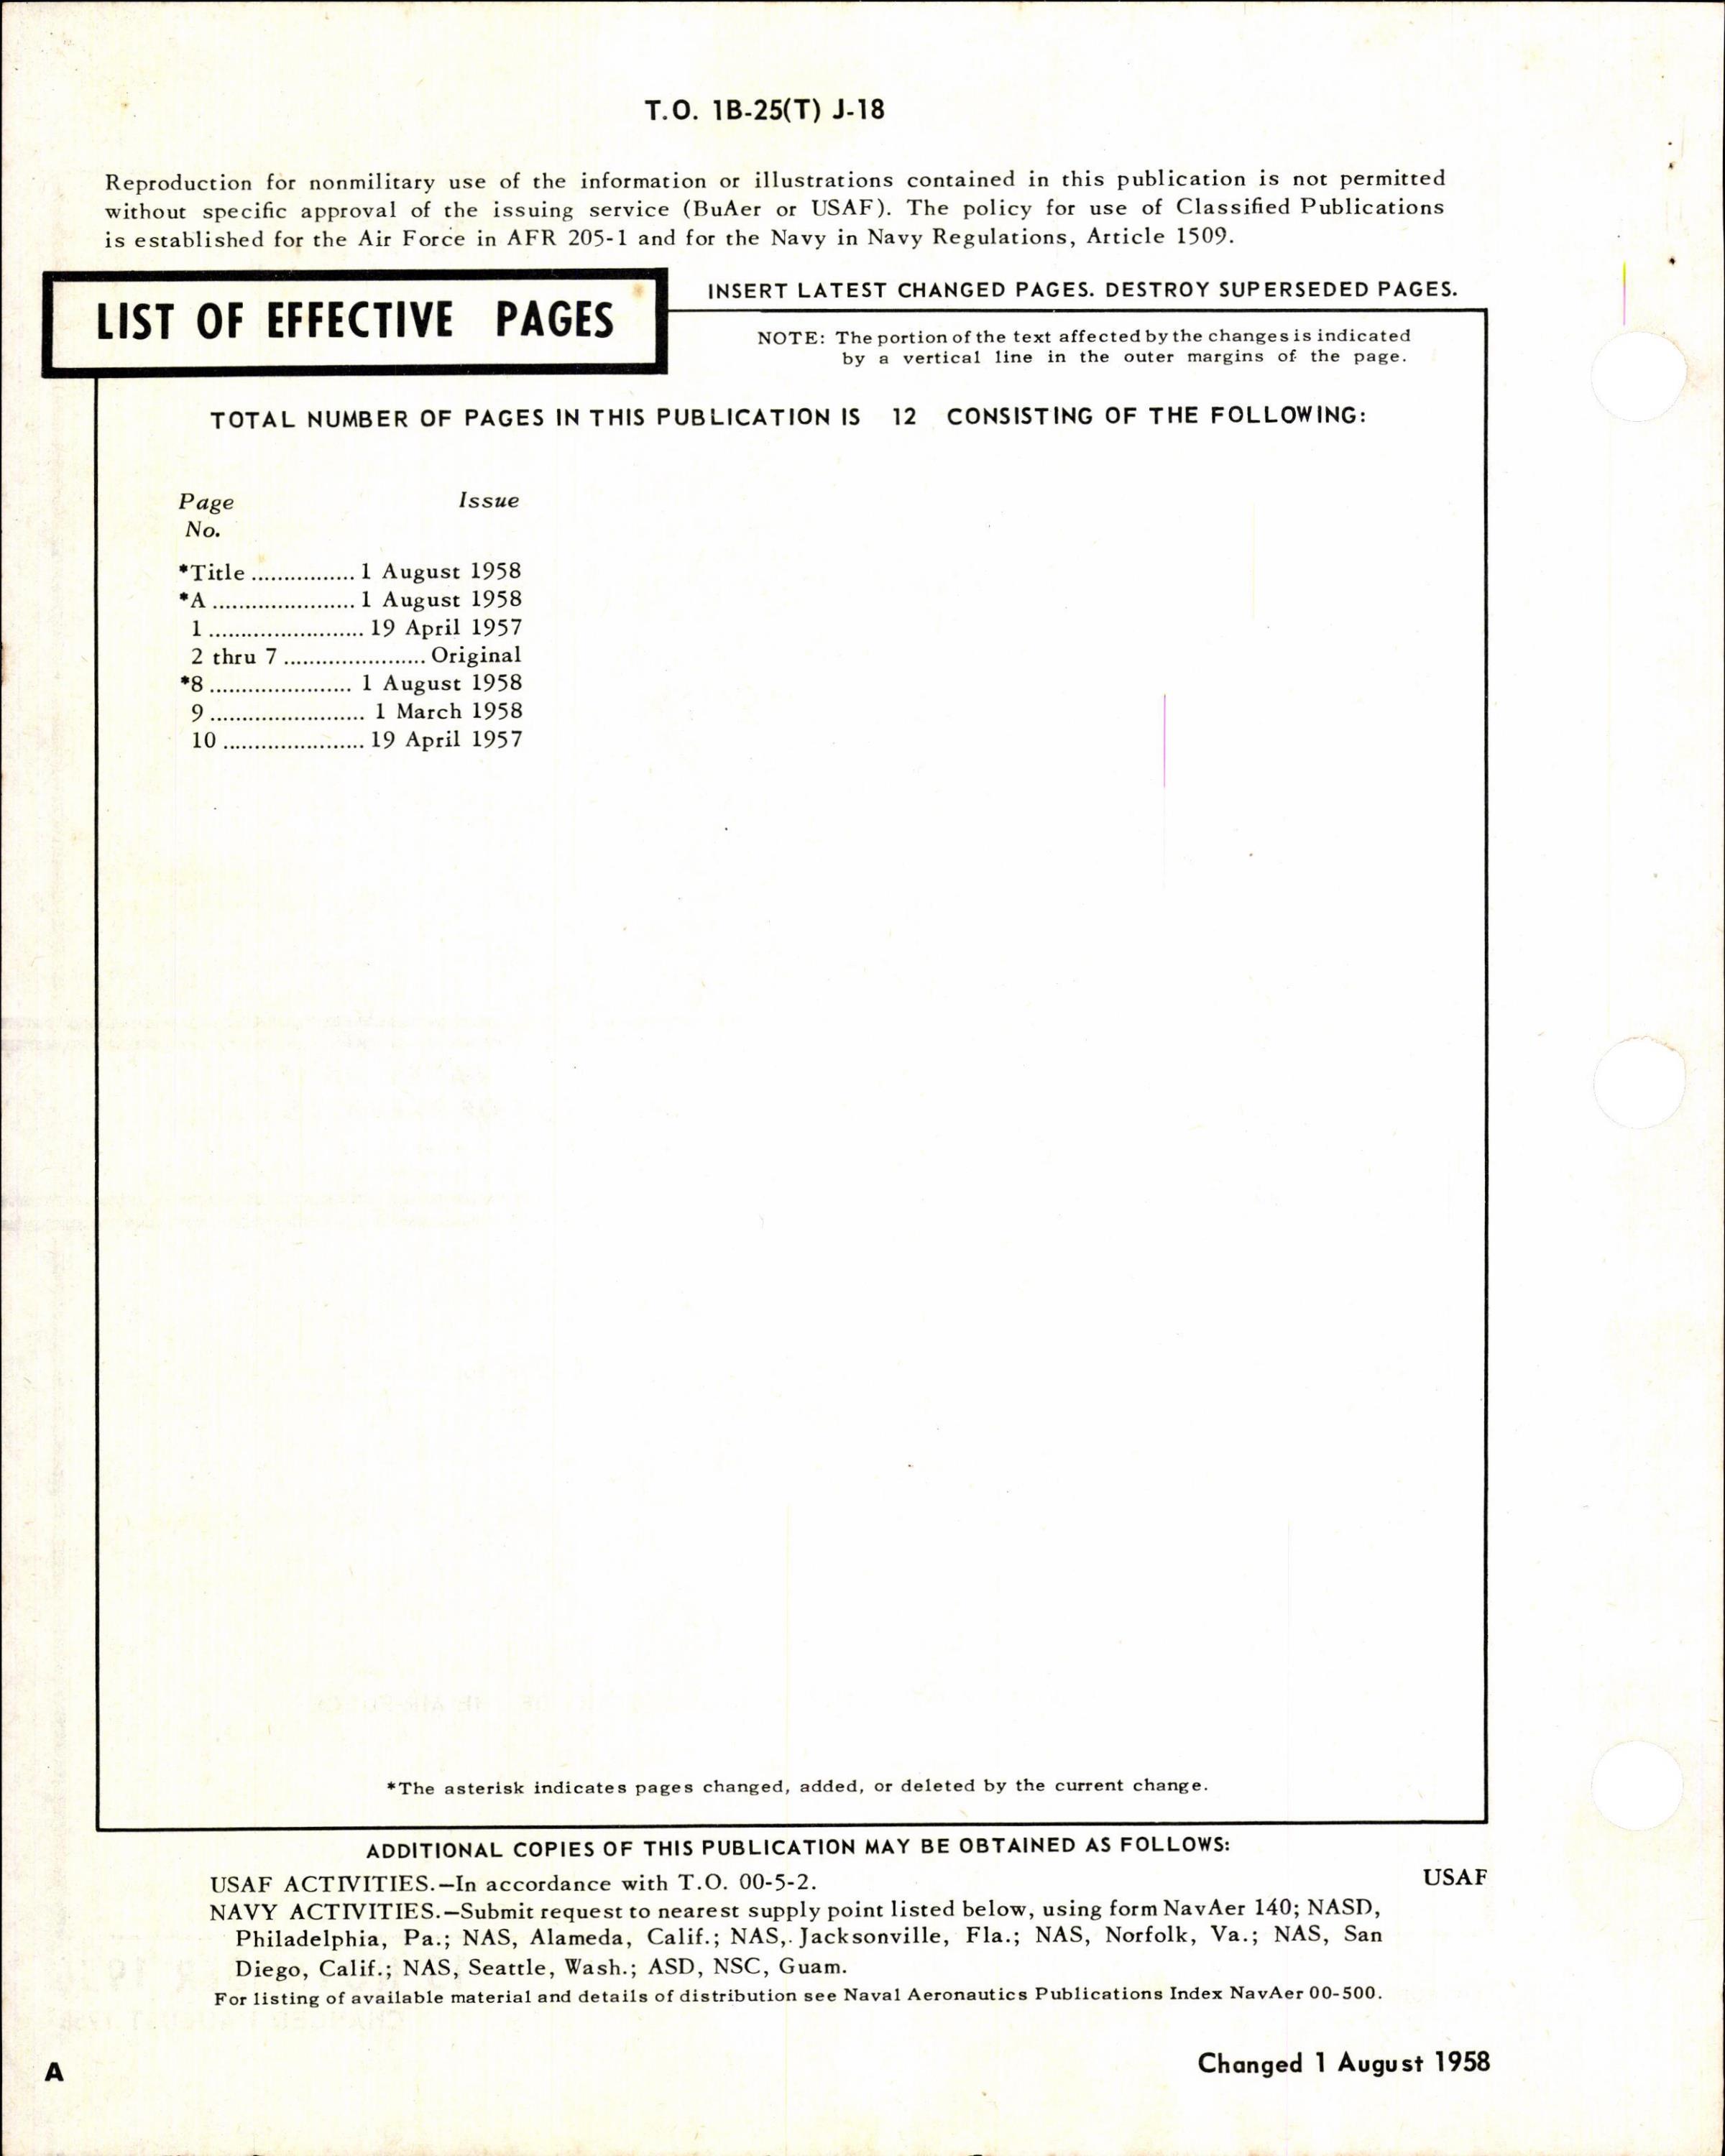 Sample page 2 from AirCorps Library document: Field Maintenance Airborne Material for USAF Series B-25J